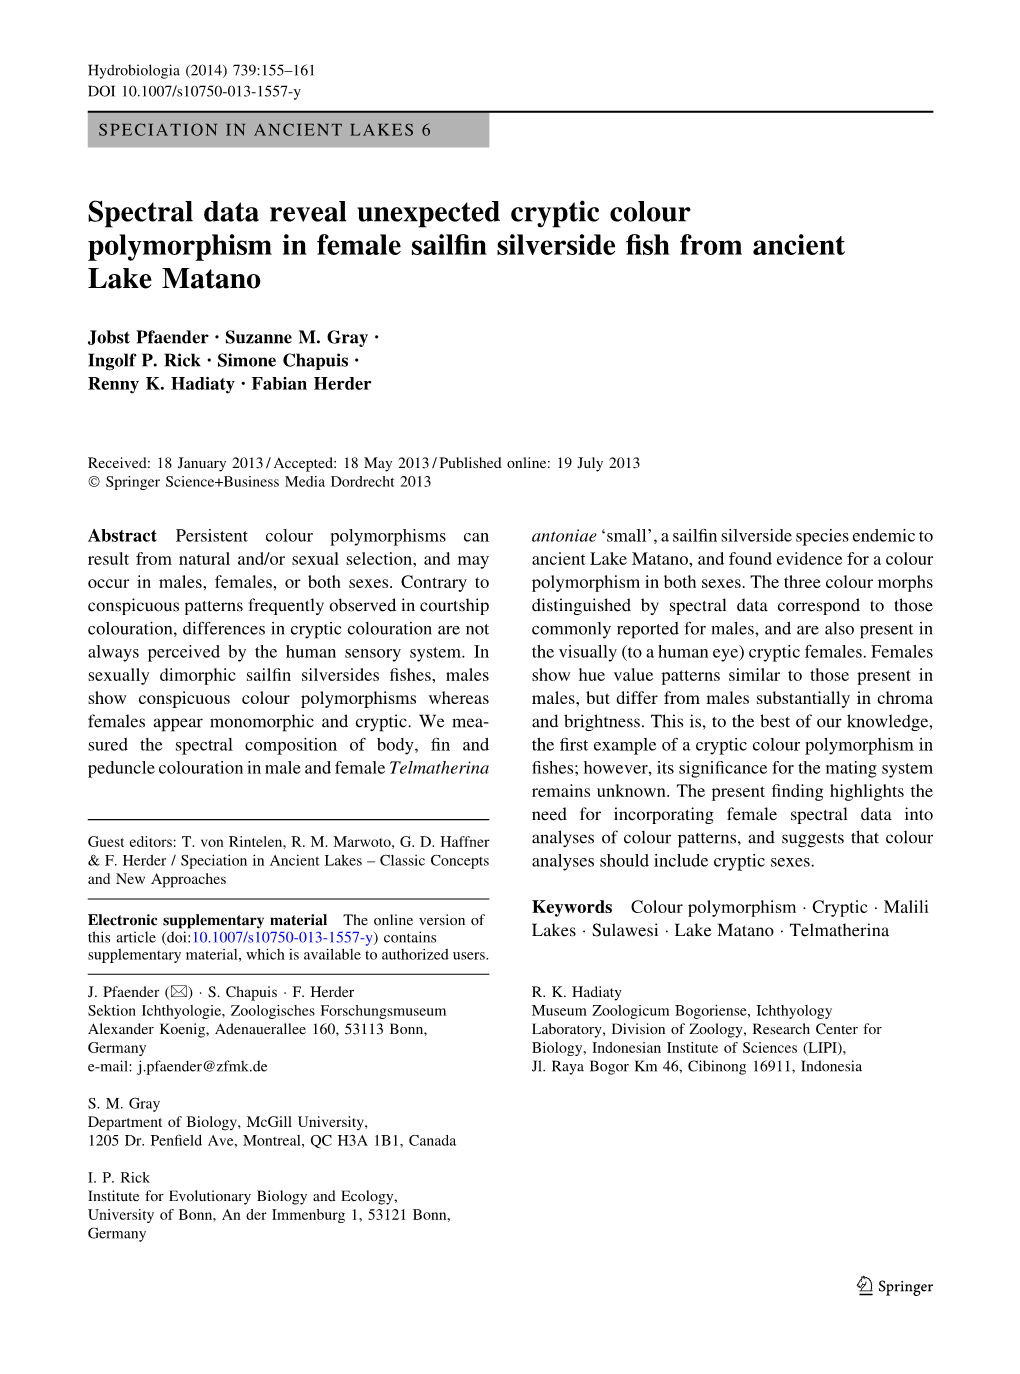 Spectral Data Reveal Unexpected Cryptic Colour Polymorphism in Female Sailﬁn Silverside ﬁsh from Ancient Lake Matano